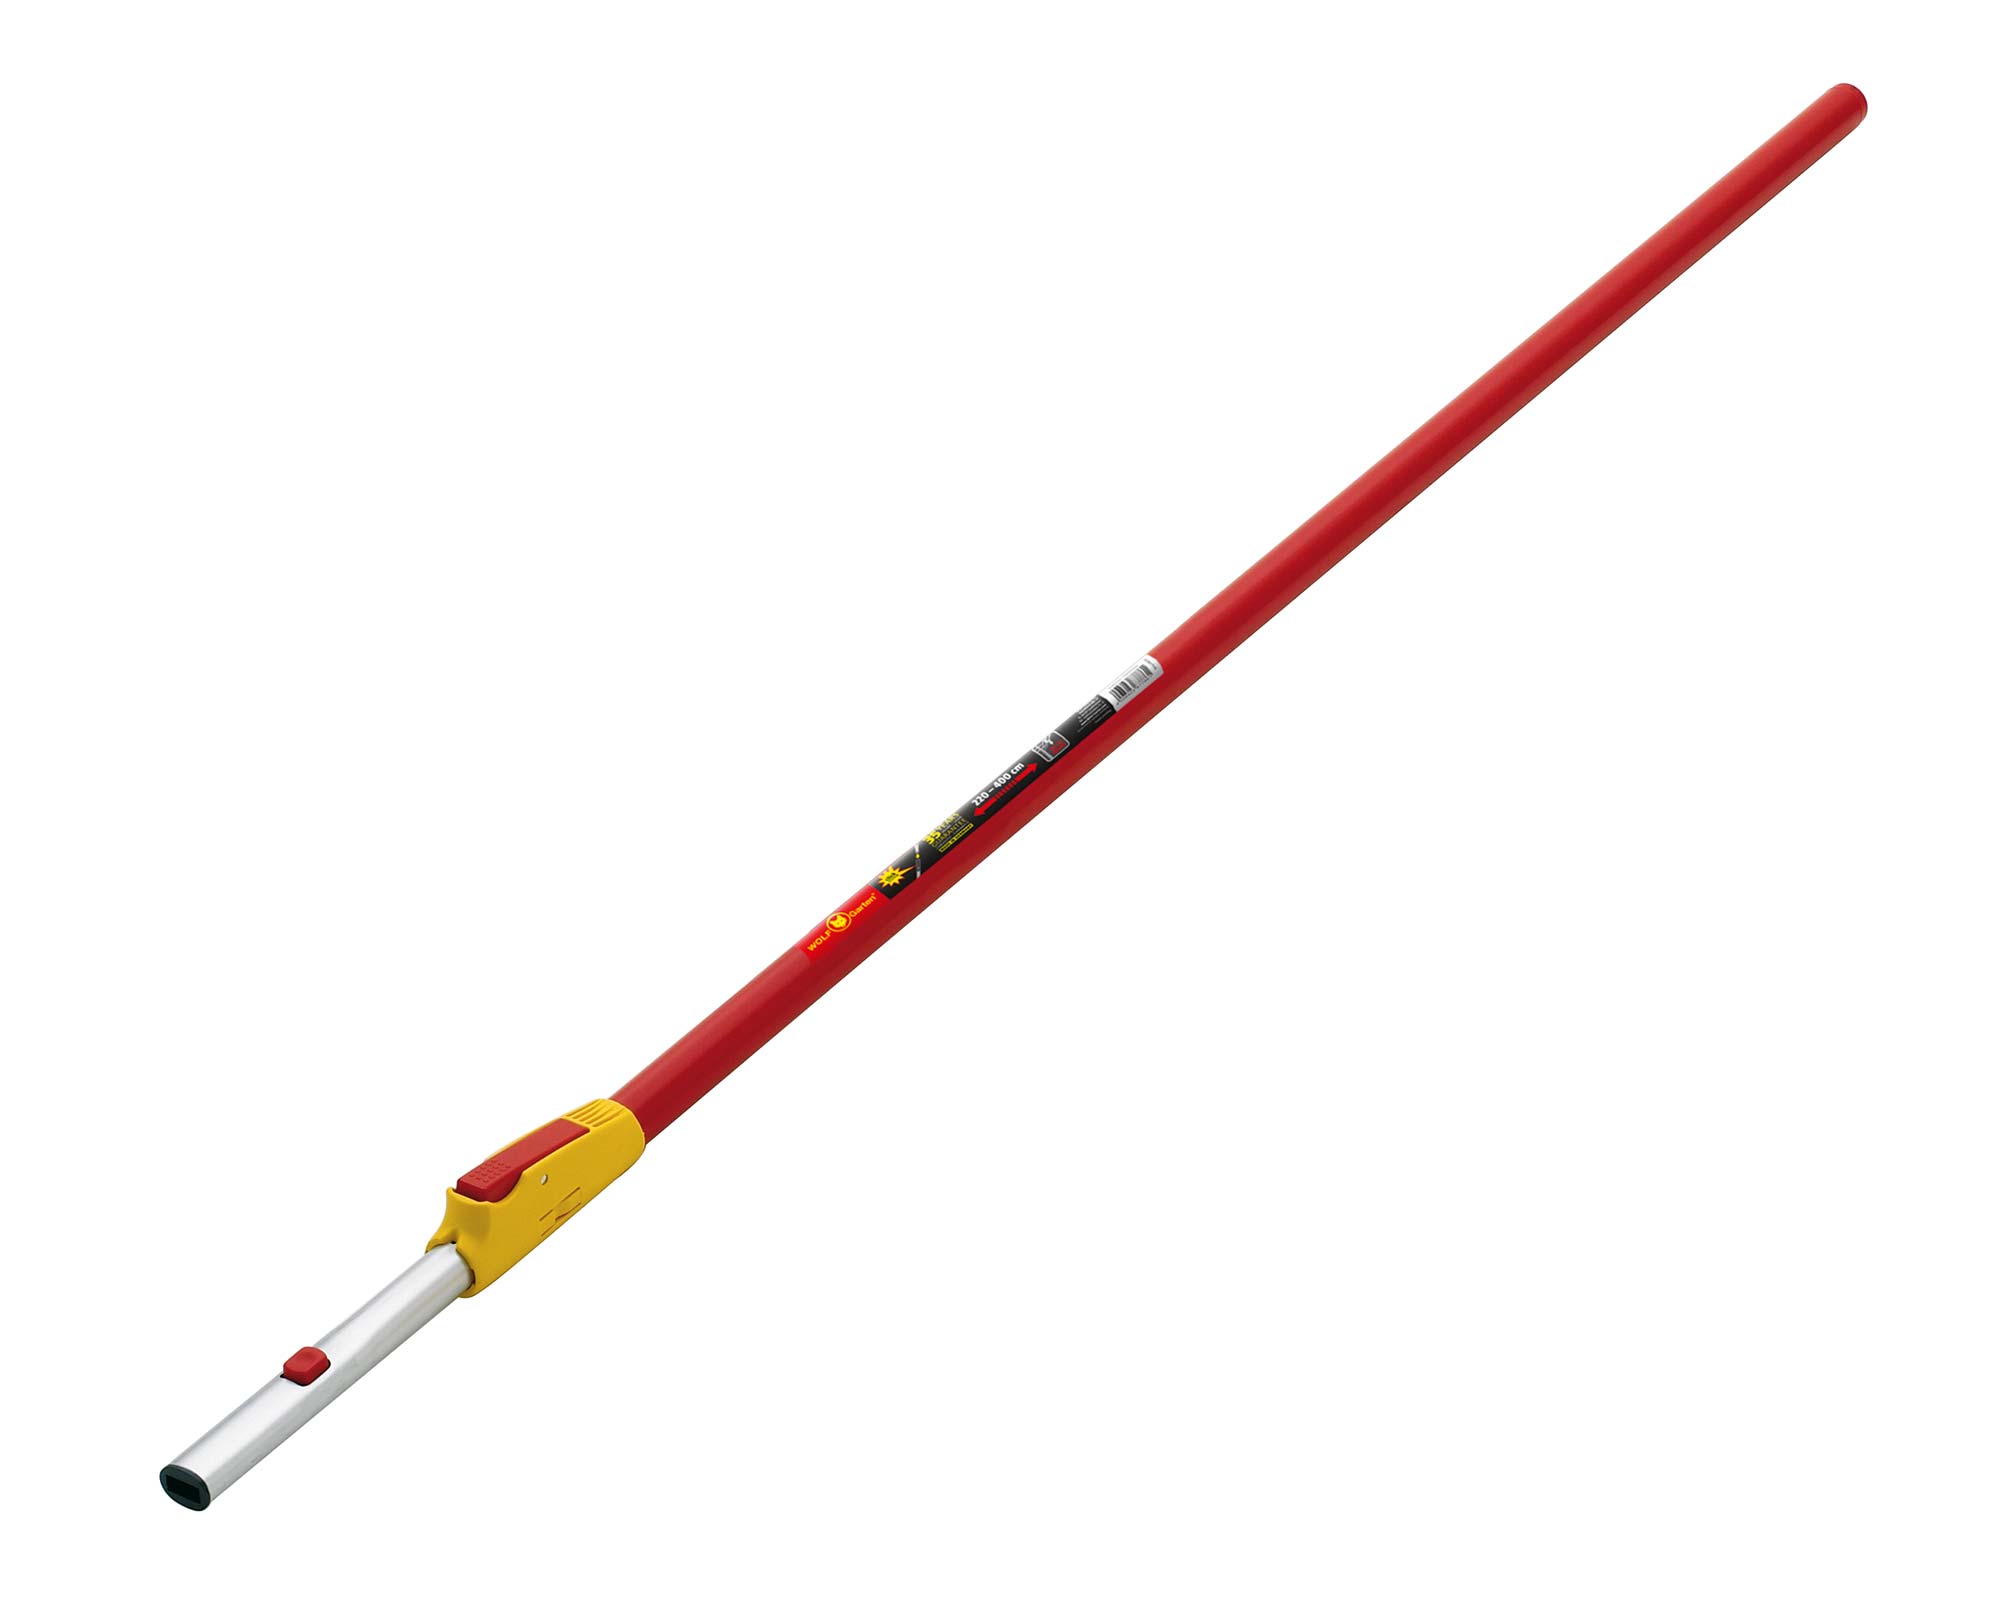 Wolf Telescopic Handle in two lengths ZMV3 ZMV4 for use with Wolf Multi-change Tool Range